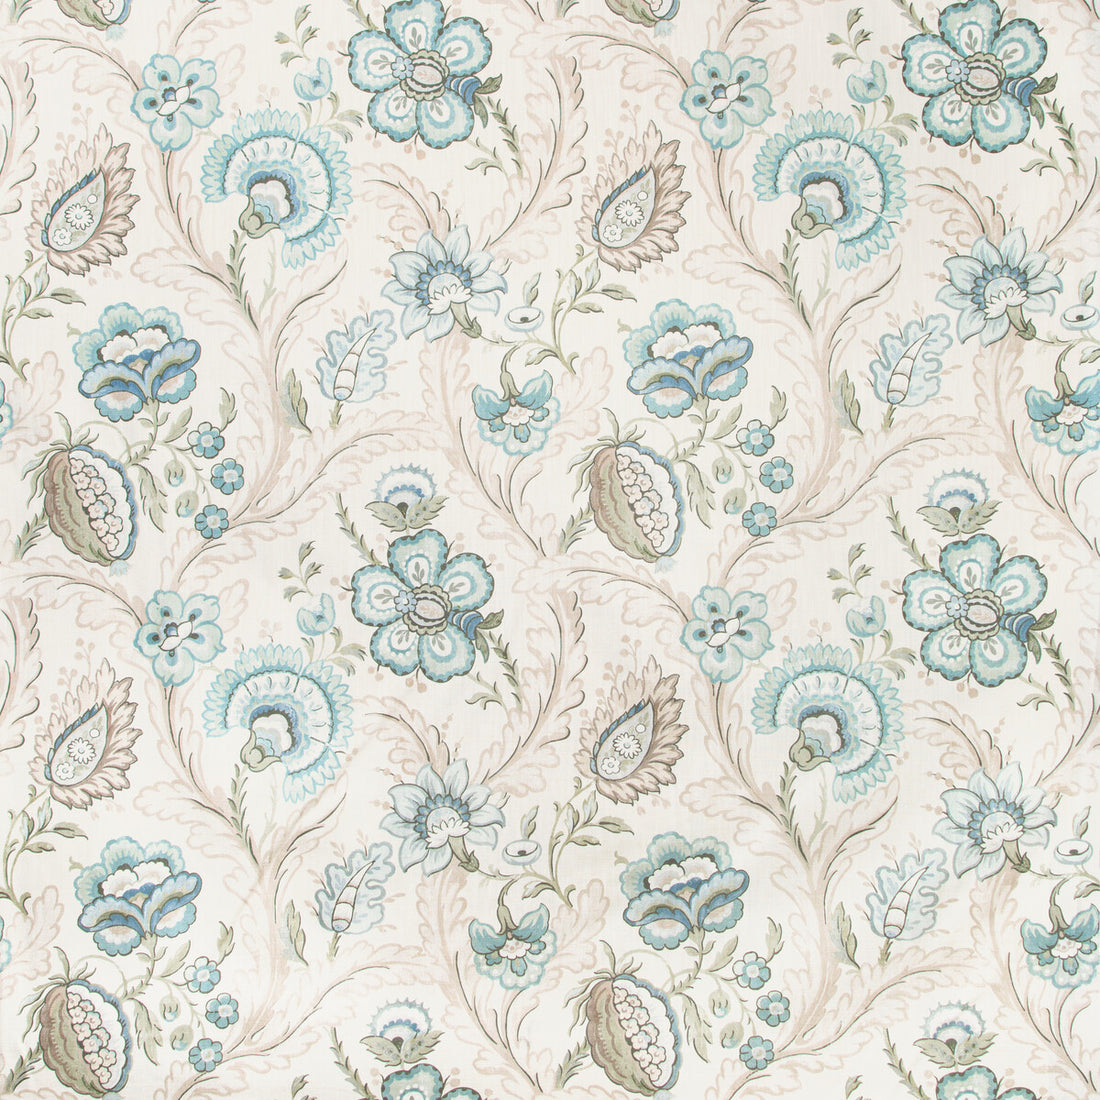 Wimberly Print fabric in aqua/sage color - pattern 2020186.1323.0 - by Lee Jofa in the Avondale collection